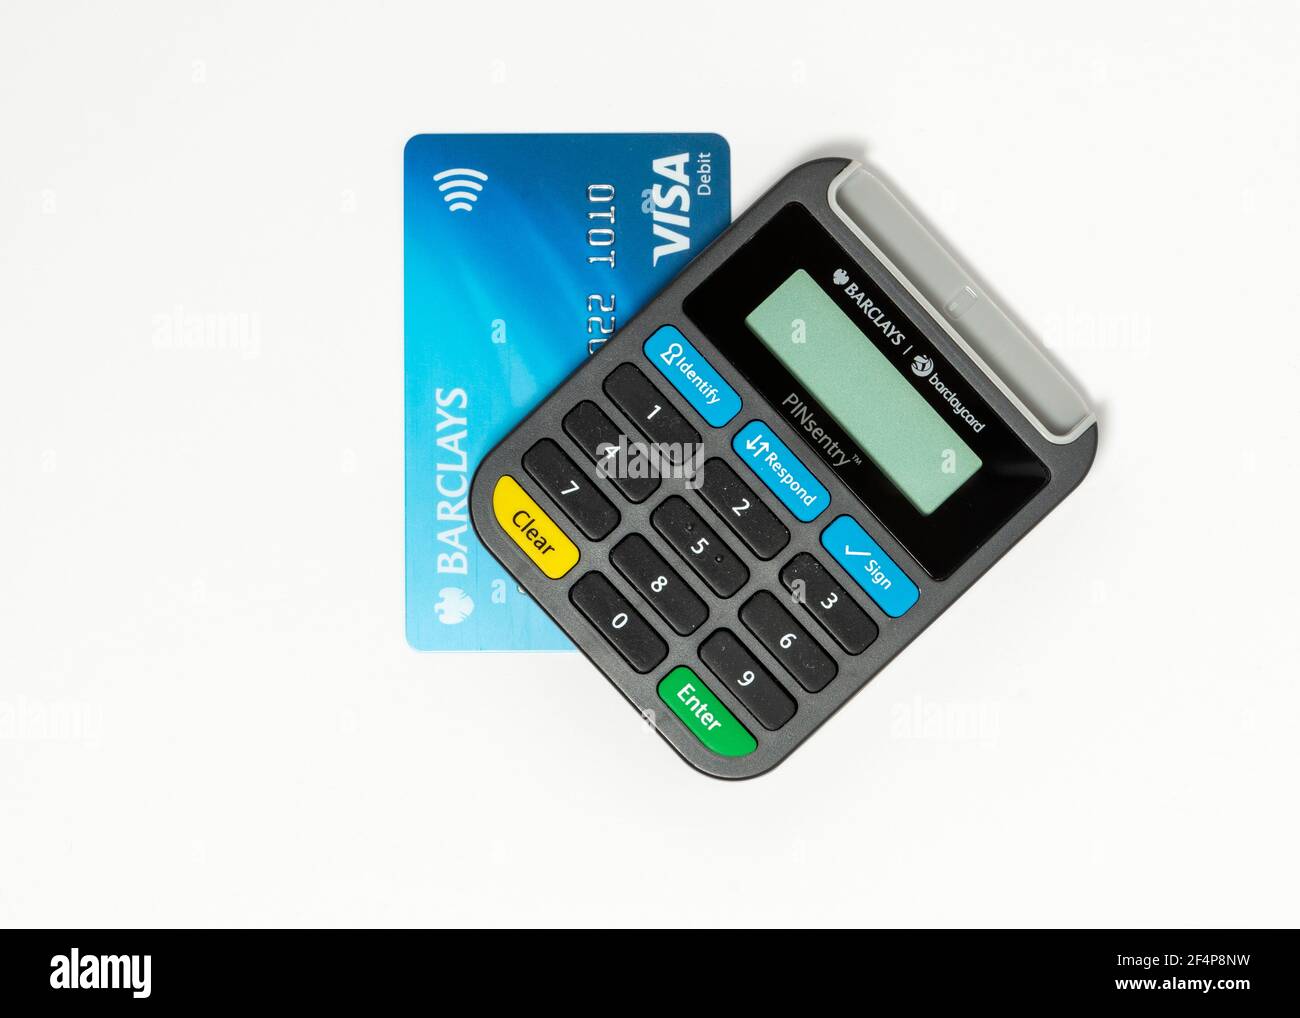 Barclays Pinsentry card reader device and a Visa debit card on white Stock Photo